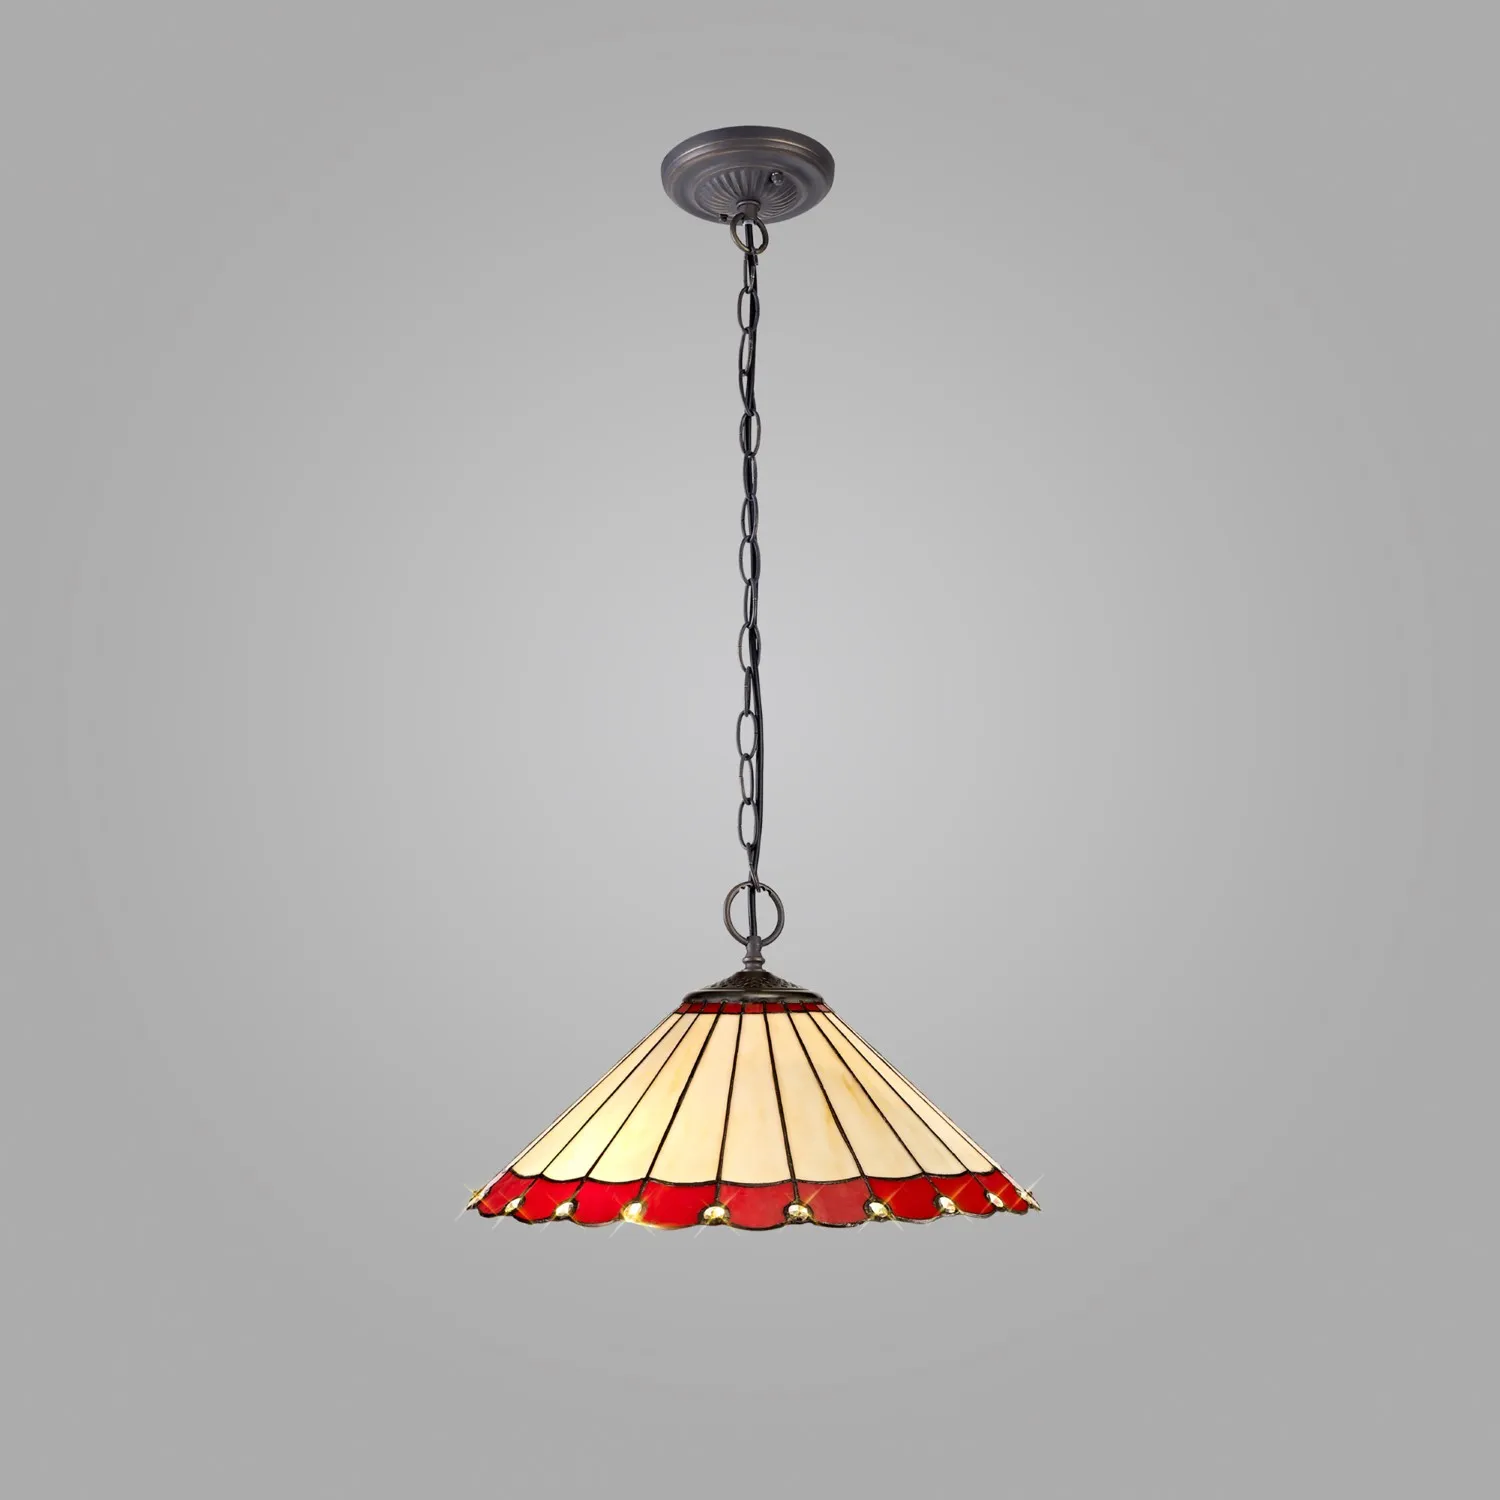 Ware 2 Light Downlighter Pendant E27 With 40cm Tiffany Shade, Red Cream Crystal Aged Antique Brass